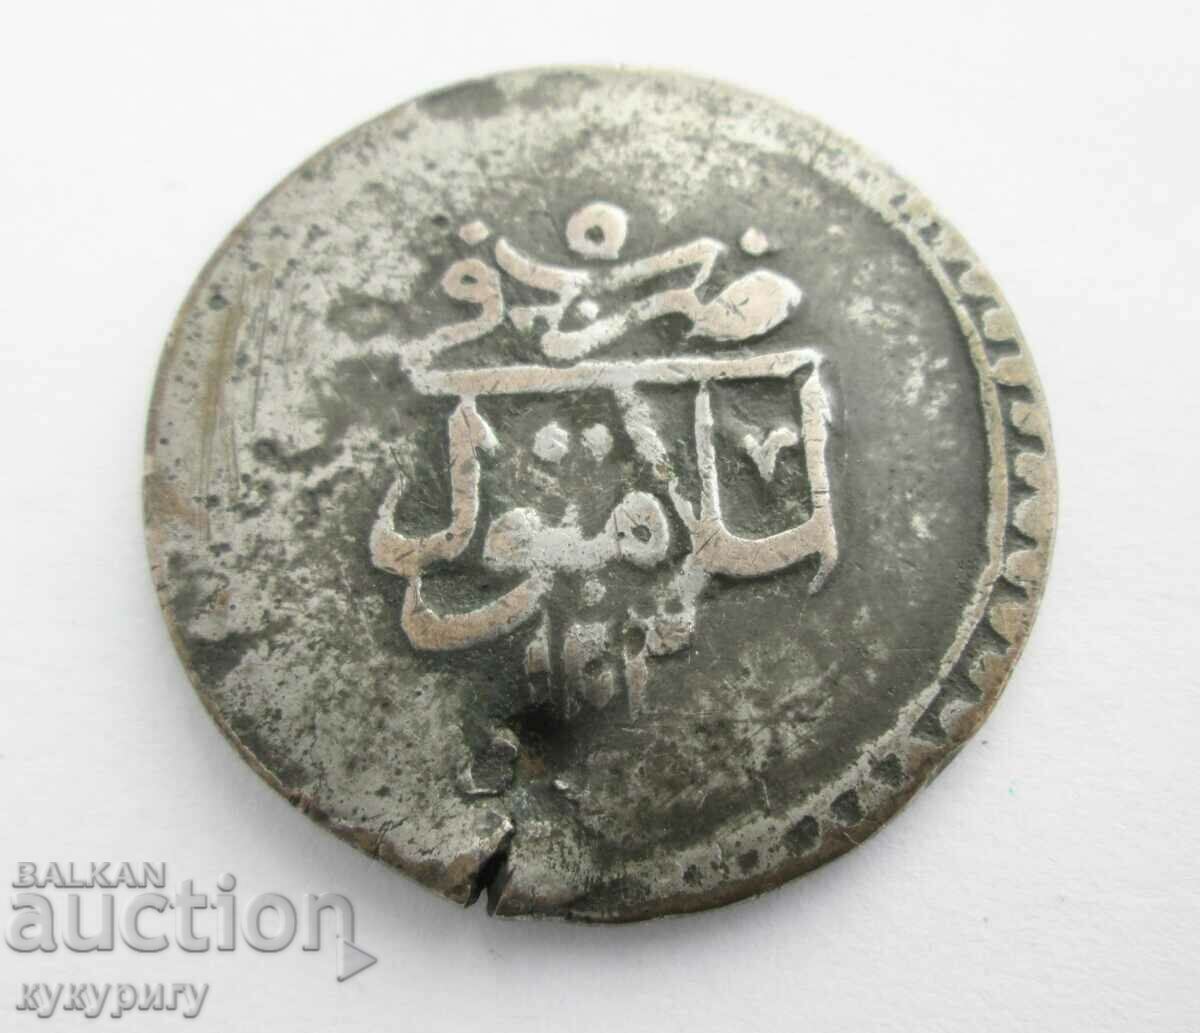 Old large / large Turkish Ottoman jewelry coin